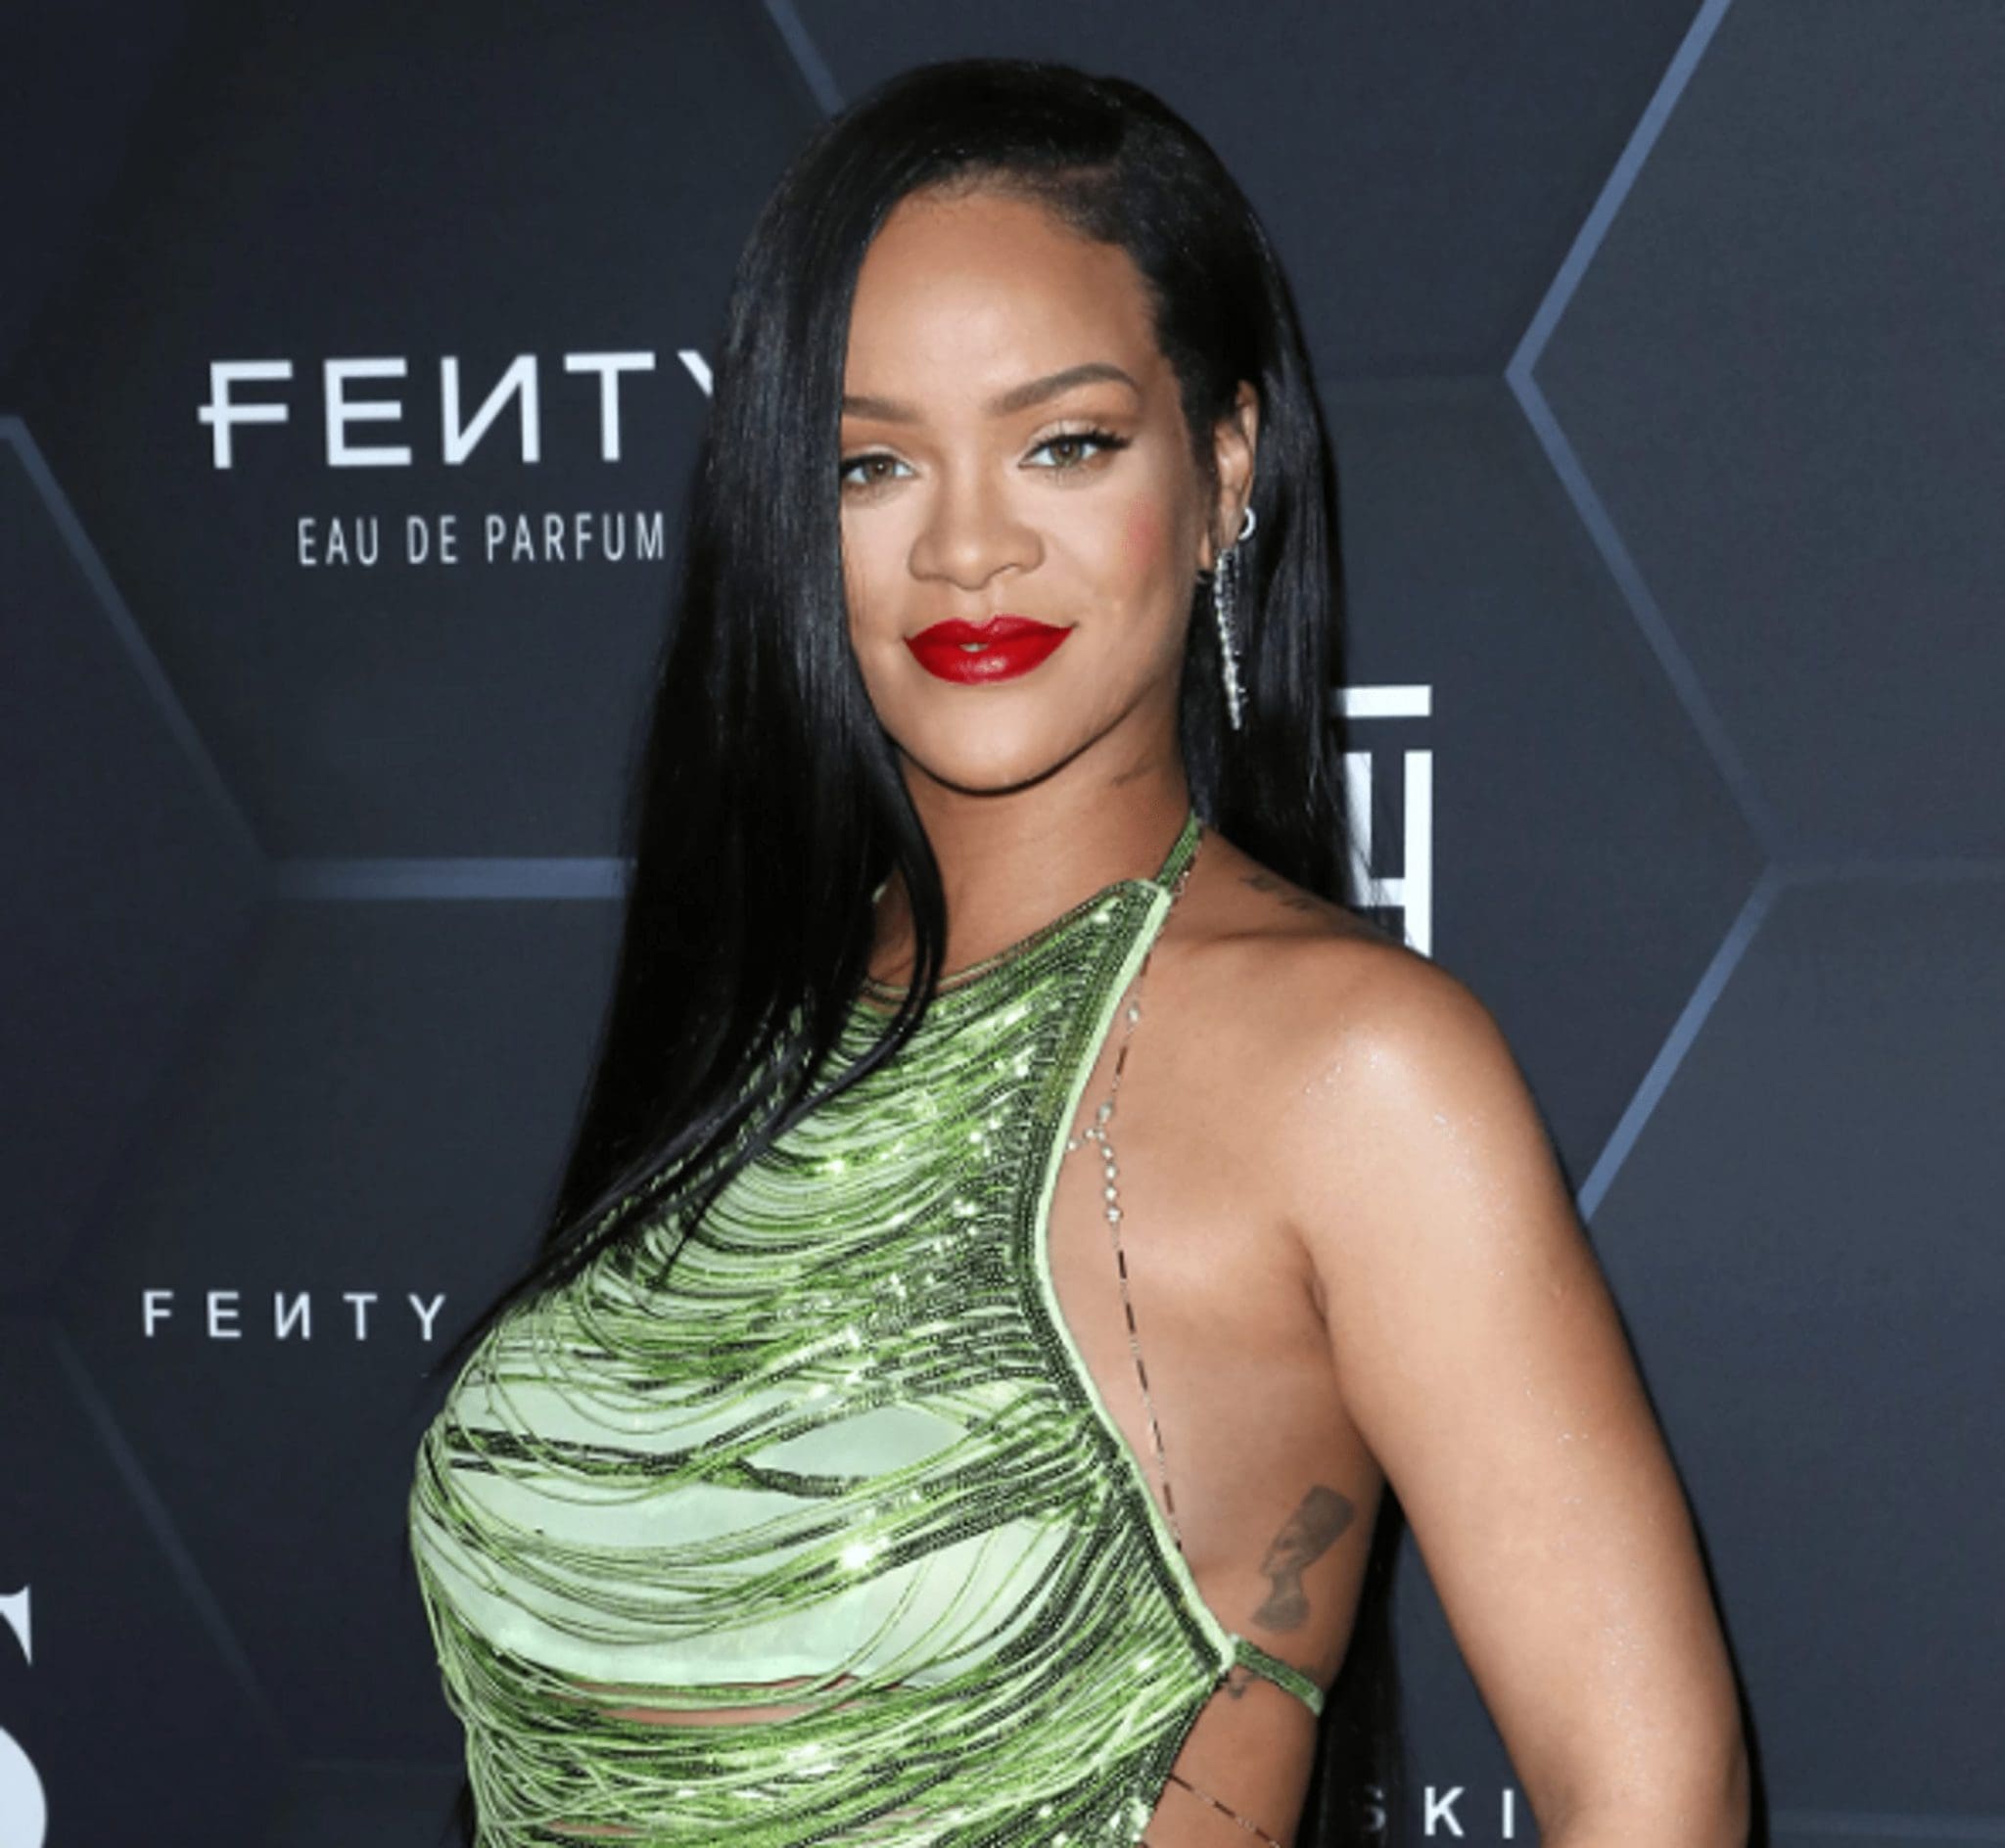 Barbadian singer Rihanna was first noticed in the world after the birth of her son